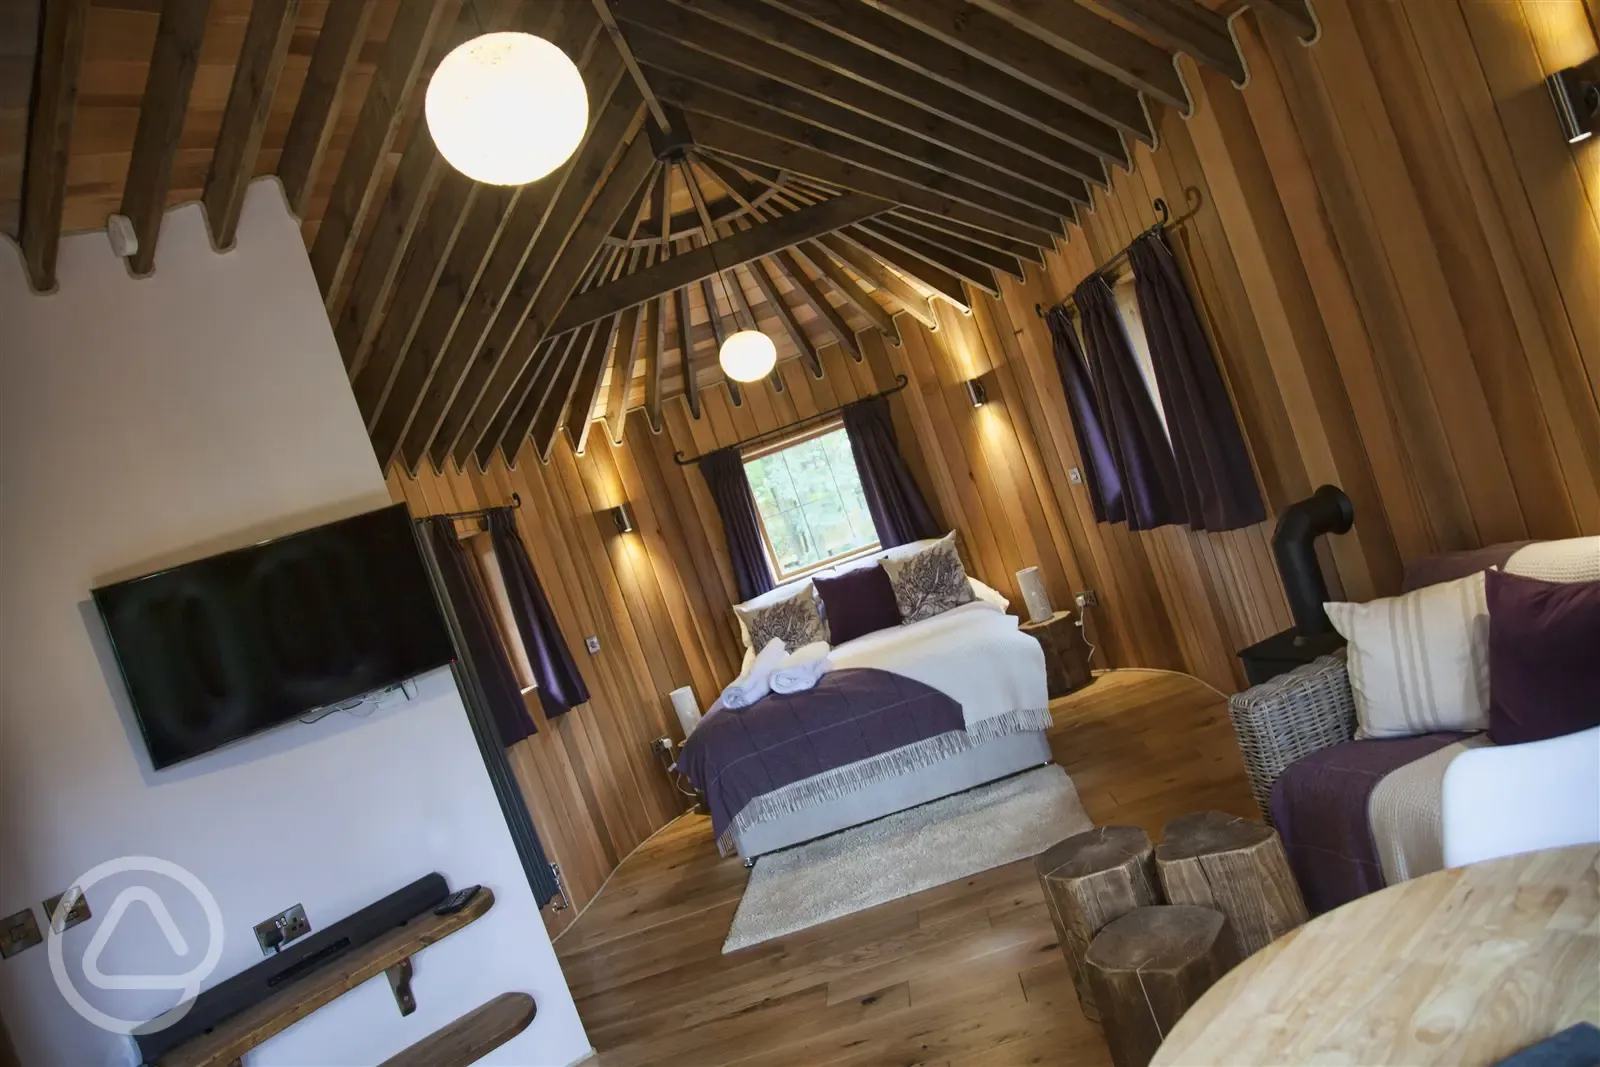 Treehouse bedroom and integral living area with widescreen TV and sound system